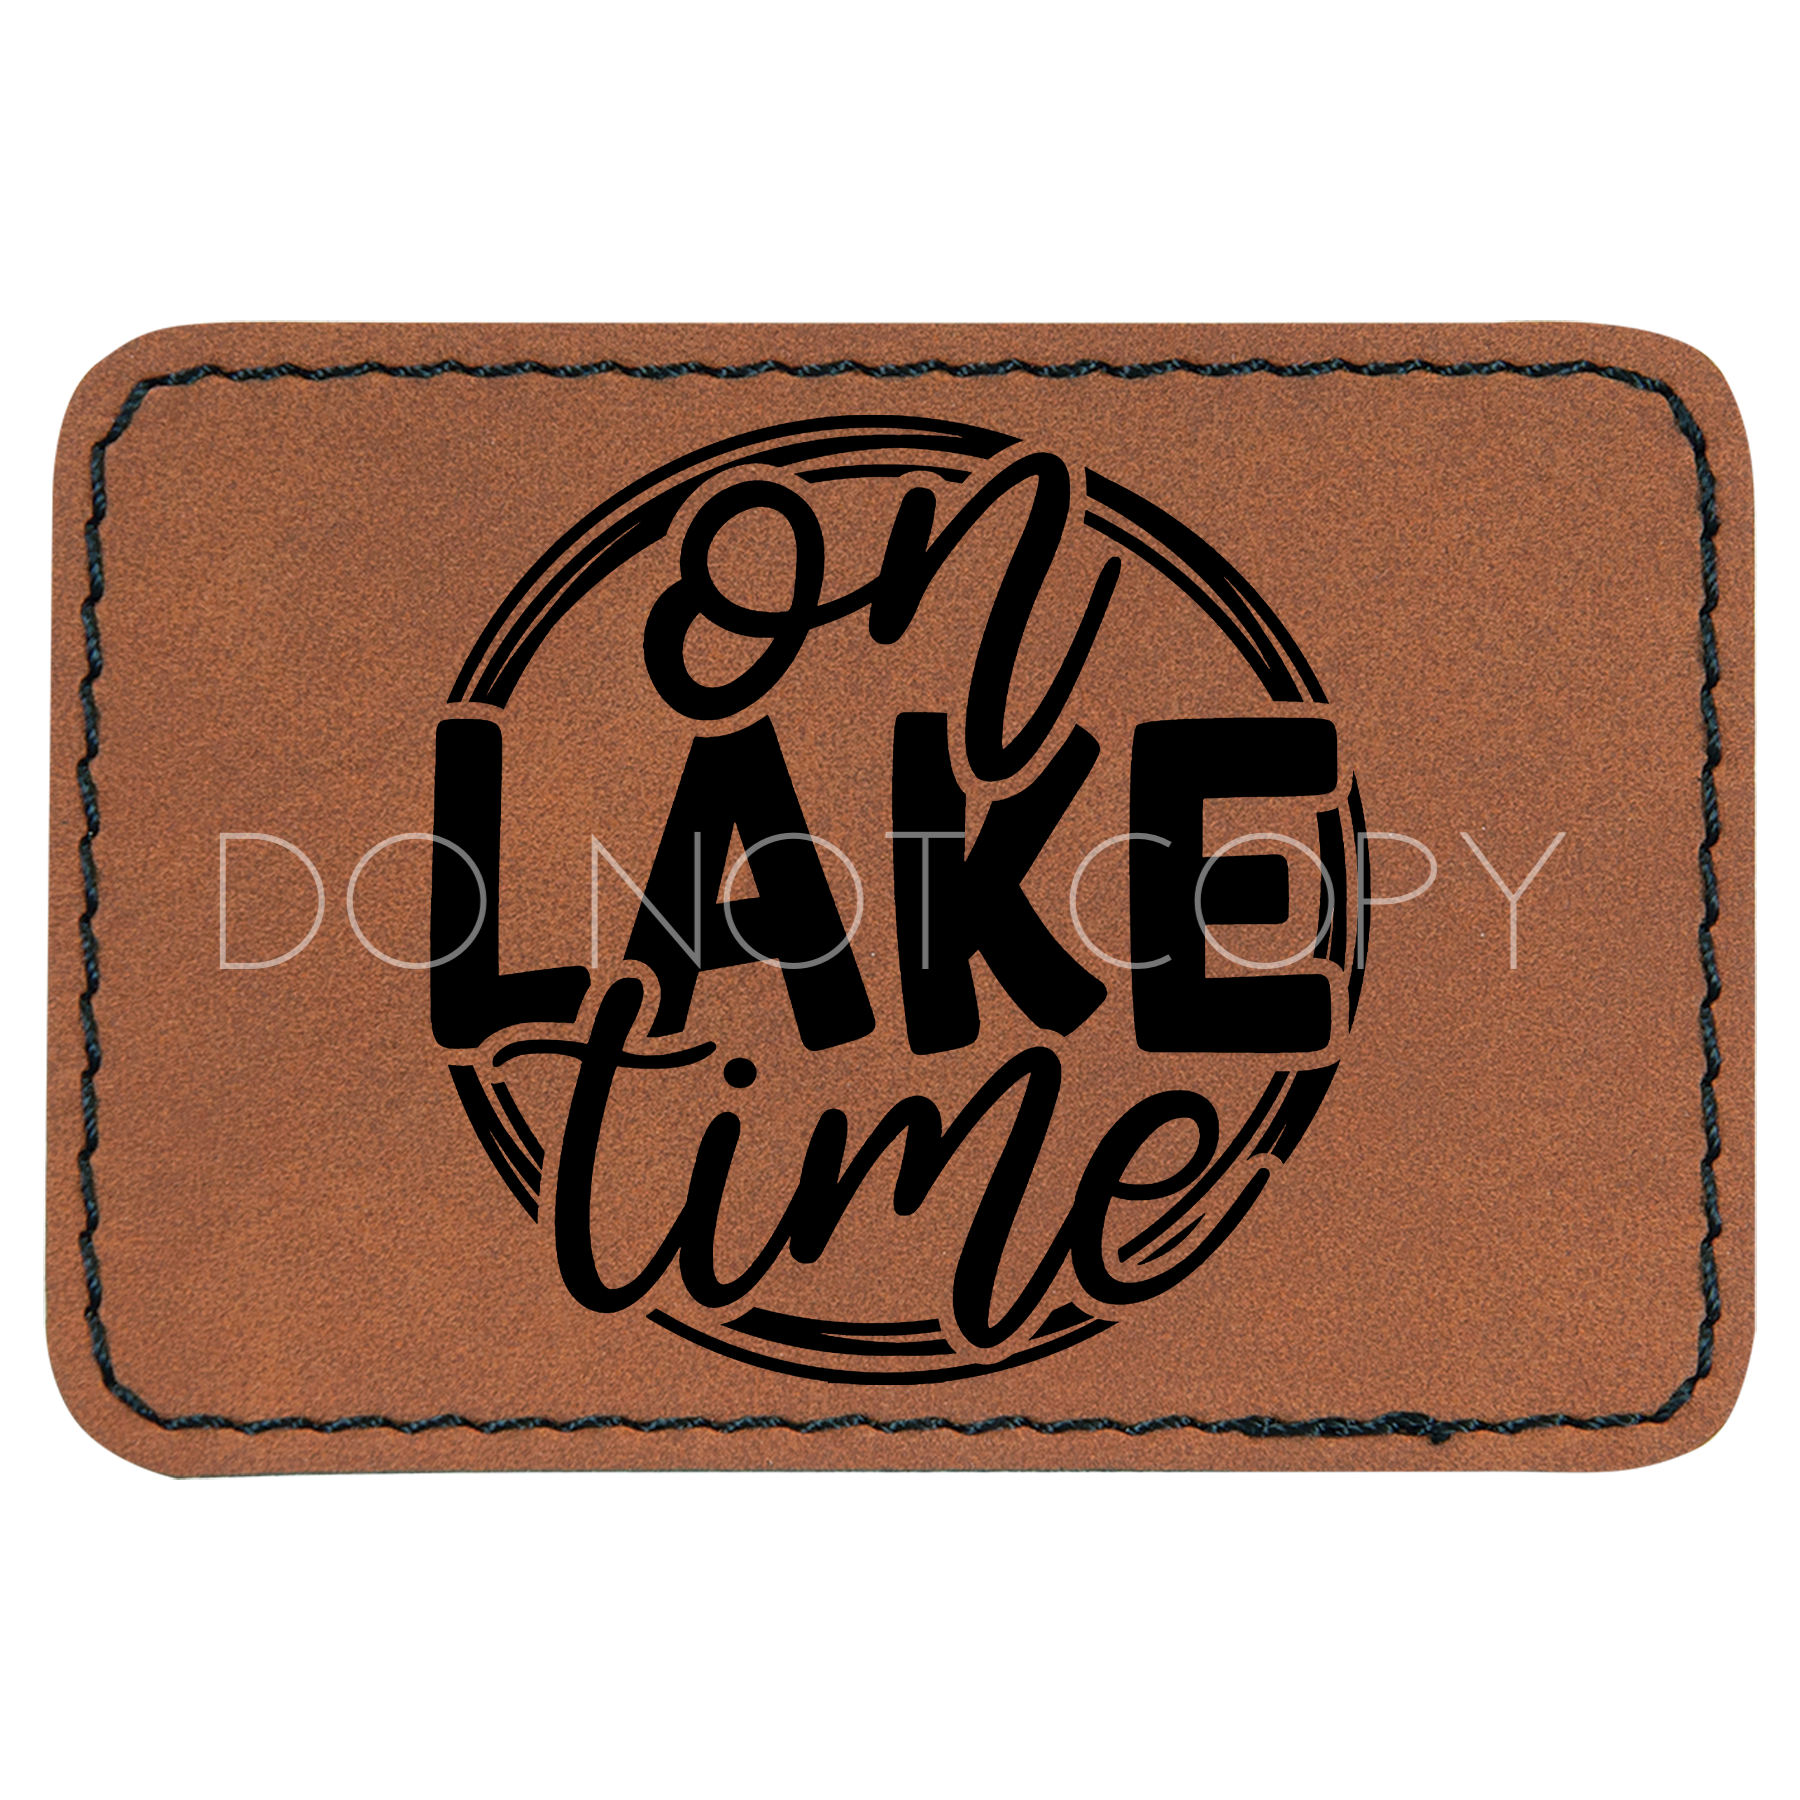 On Lake Time Patch